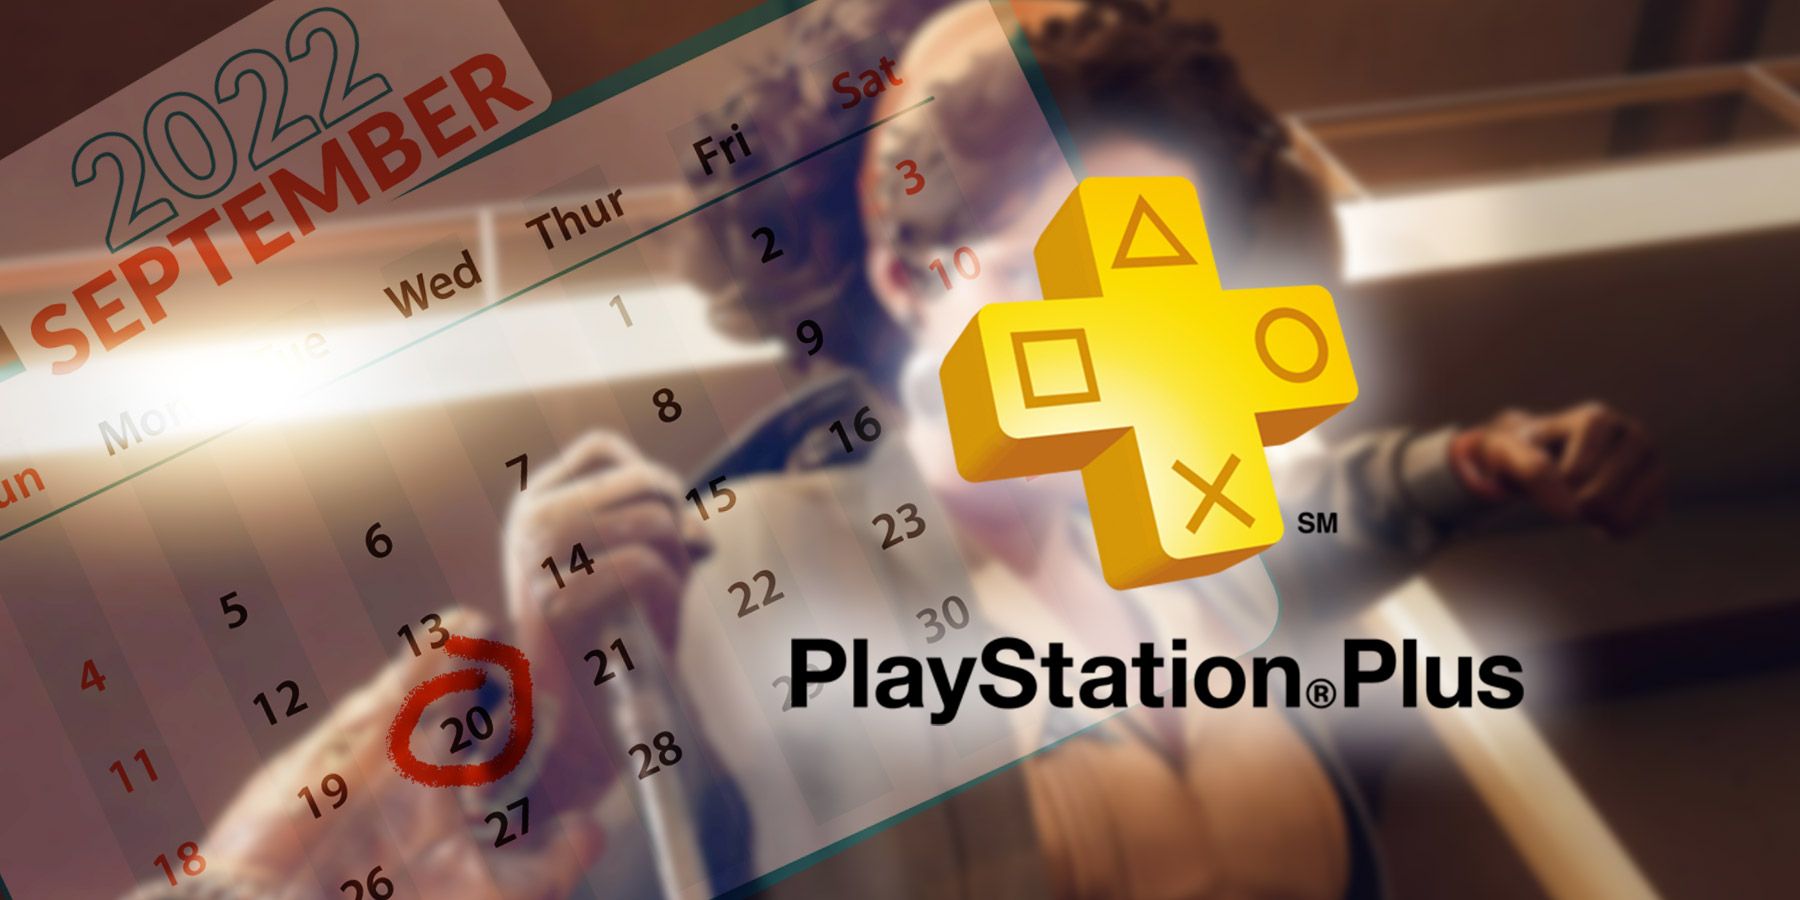 PlayStation Plus adds Need for Speed and Deathloop in September